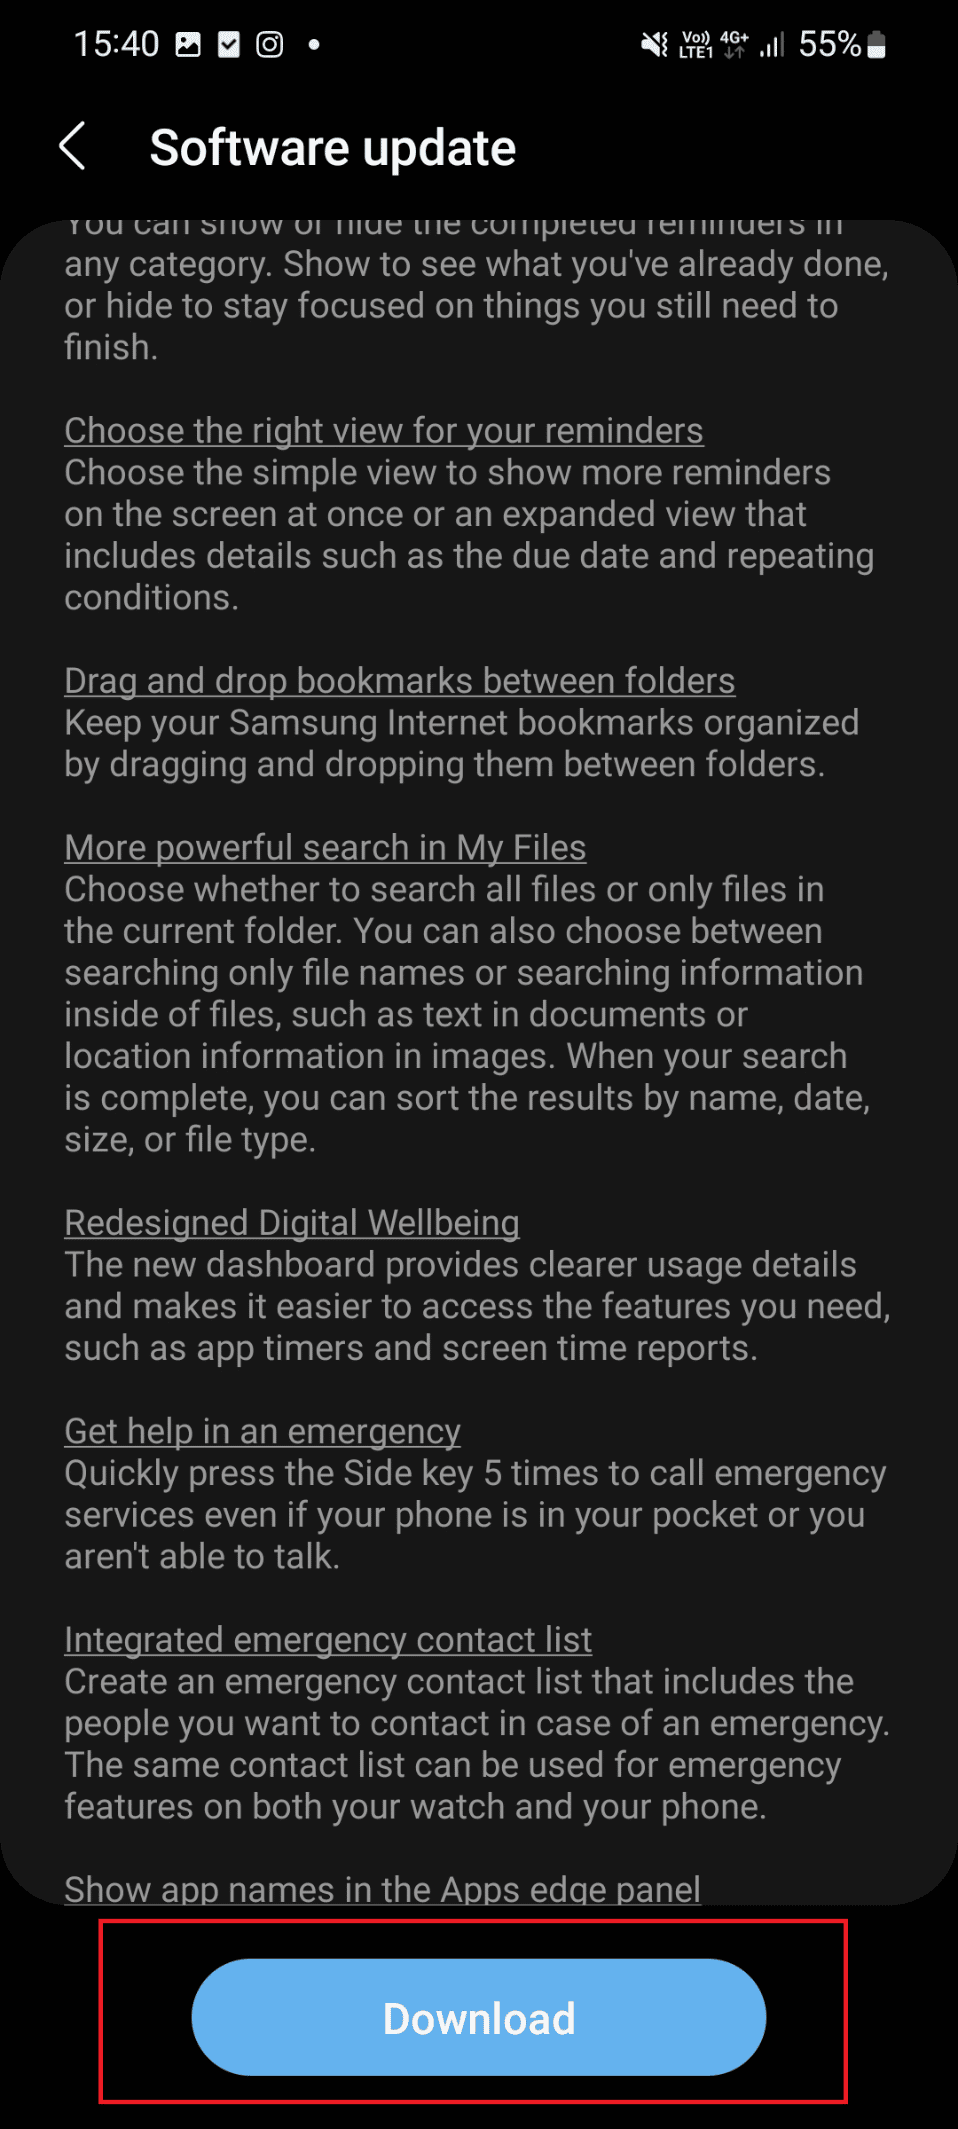 download option for software update. Top 10 Solutions to Fix WiFi Calling Not Working on Android